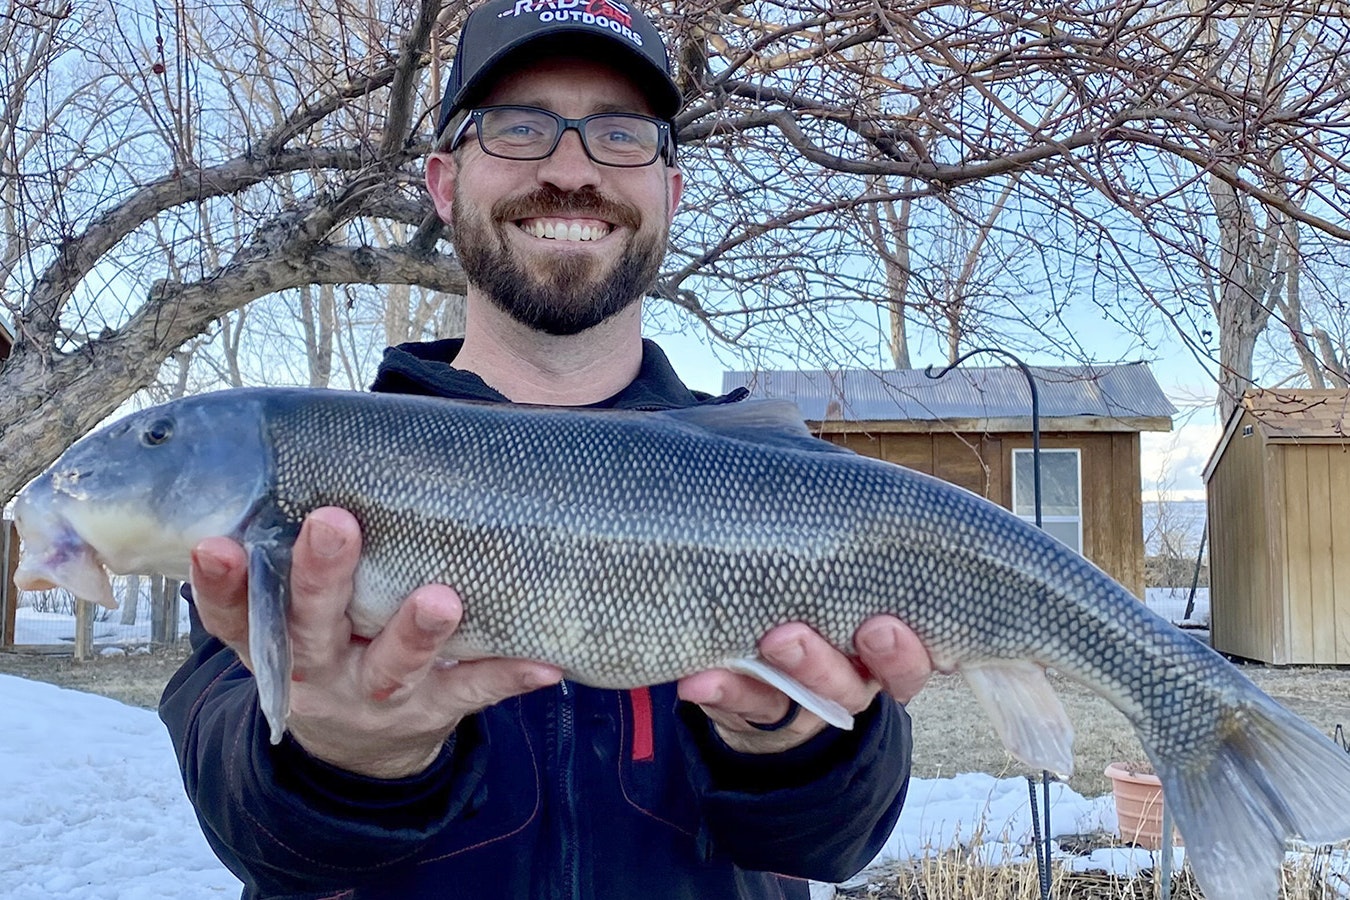 Already holding the Wyoming record for largest white suckerfish caught, Patrick Edwards recently caught a record 3-pound, 15.6-ounce longnose sucker from the Wind River.